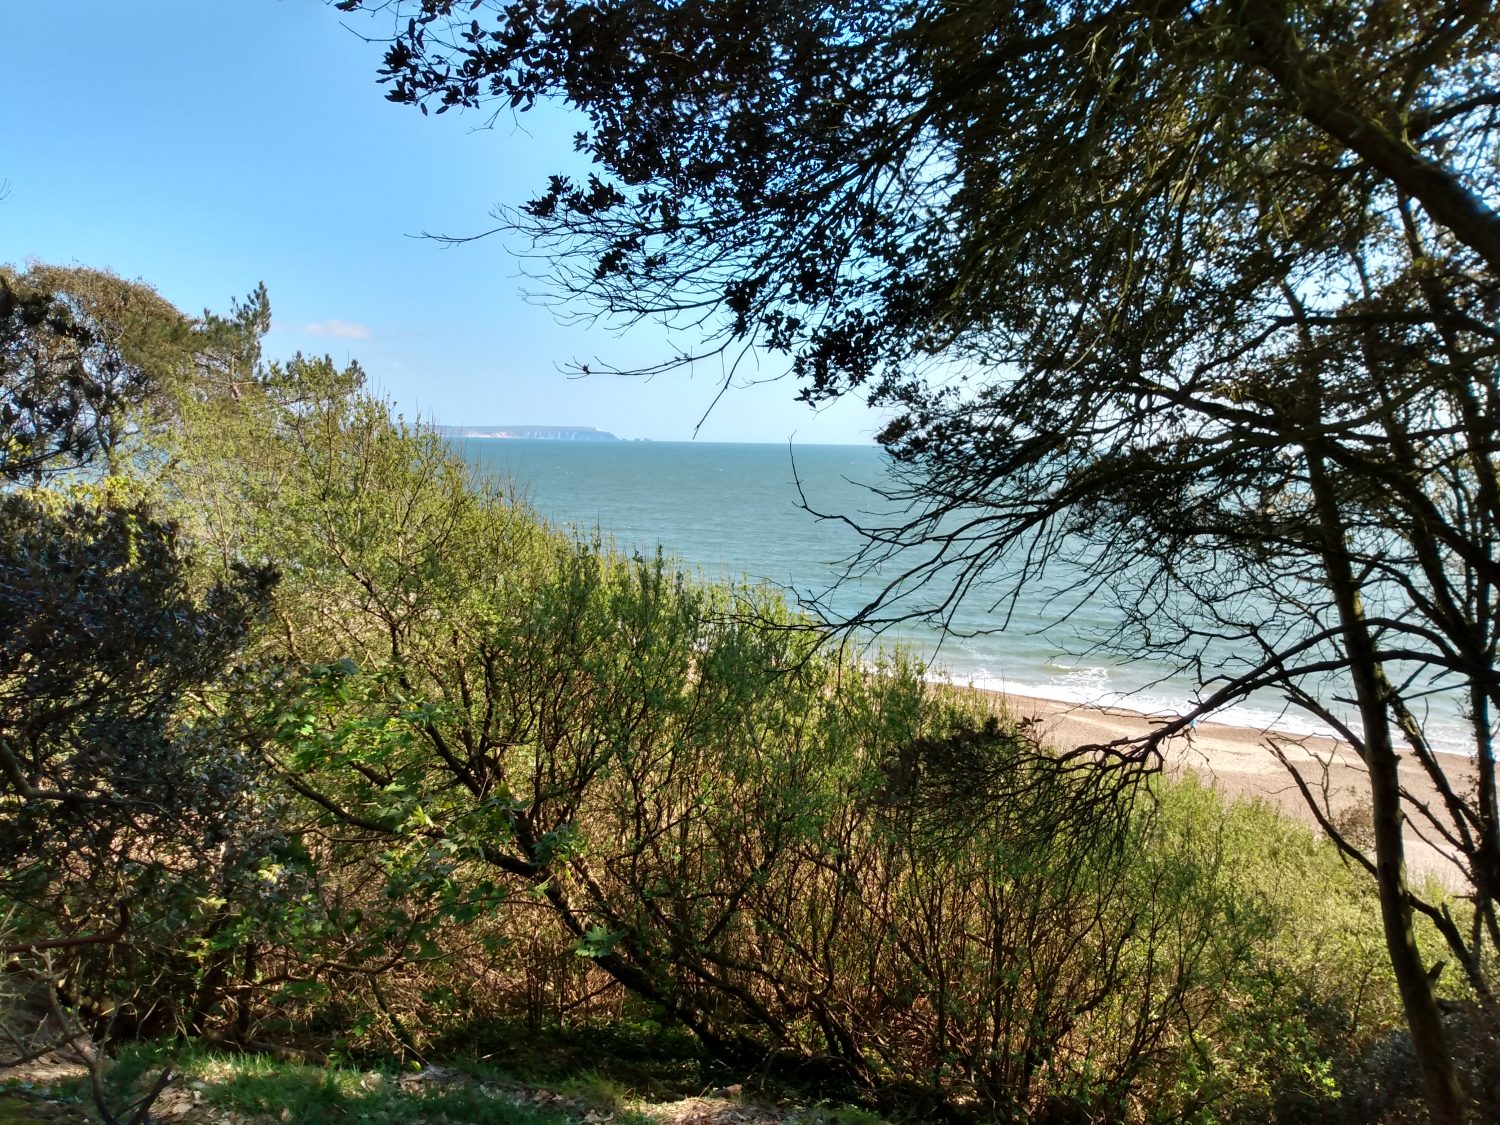 Foreground of trees and bushes with glimpse of sea and blue sky